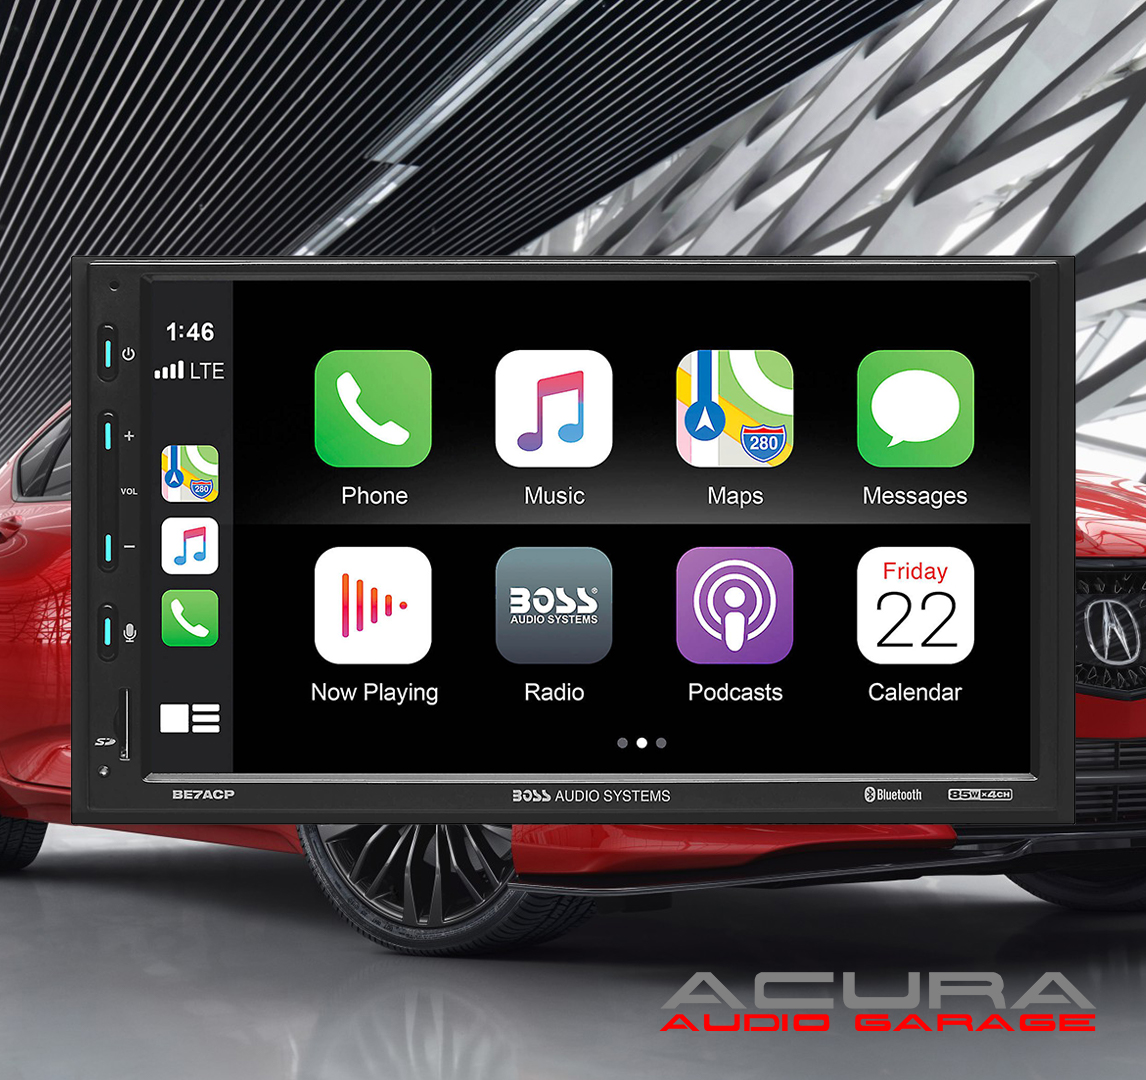 Which Acura Models Include Apple CarPlay and Android Auto? - Sunnyside Acura